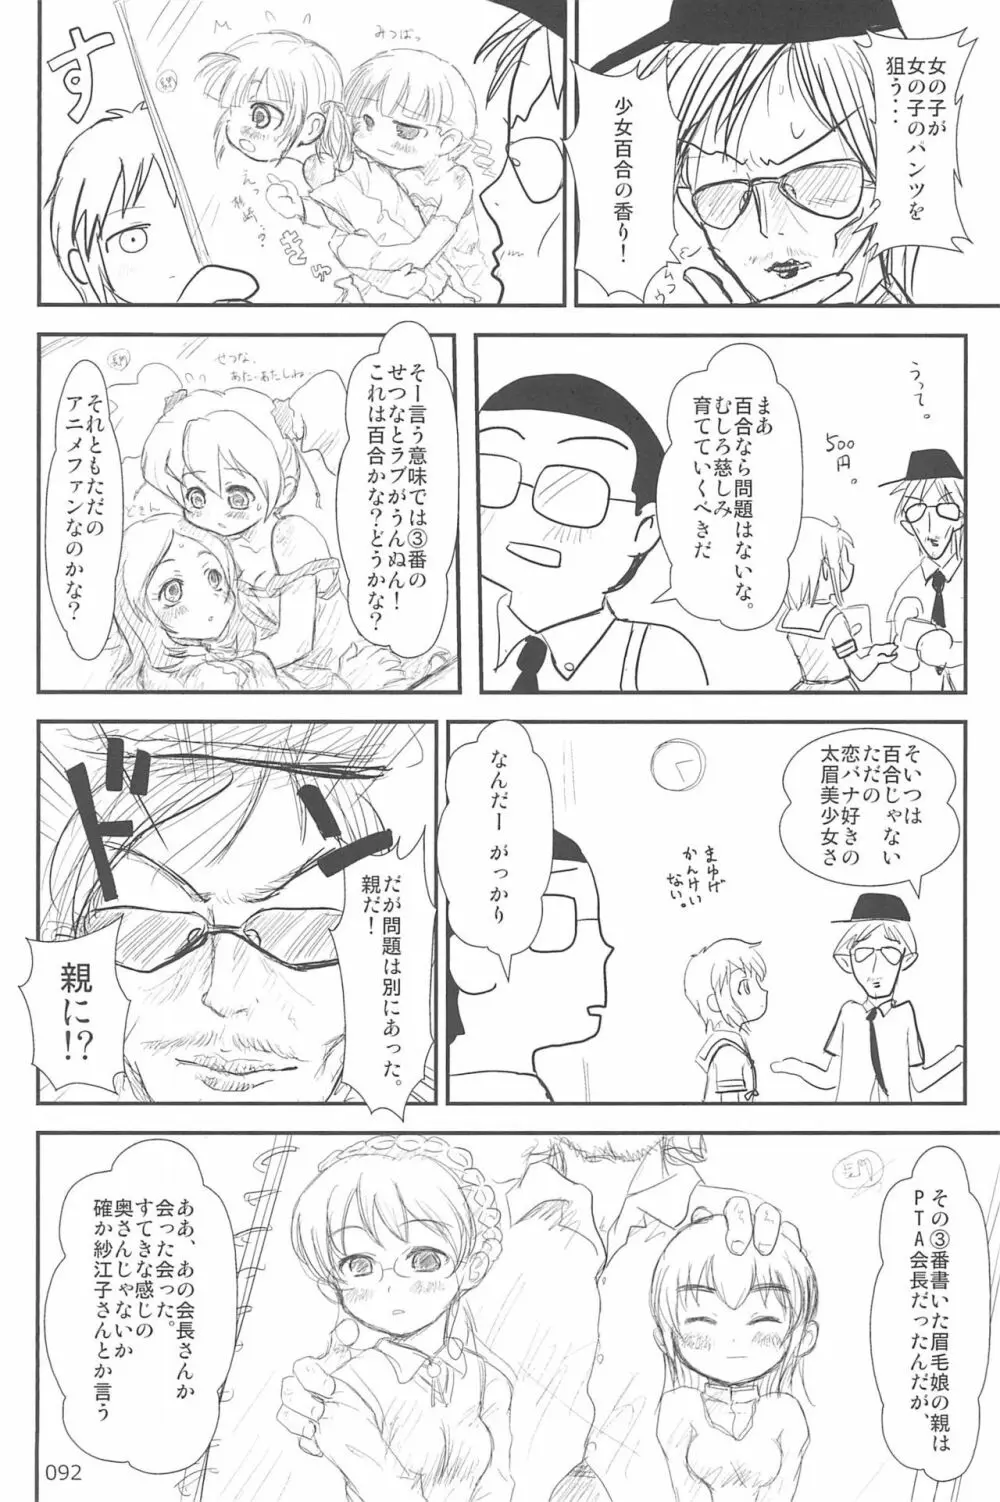 ND-special Volume 6 92ページ